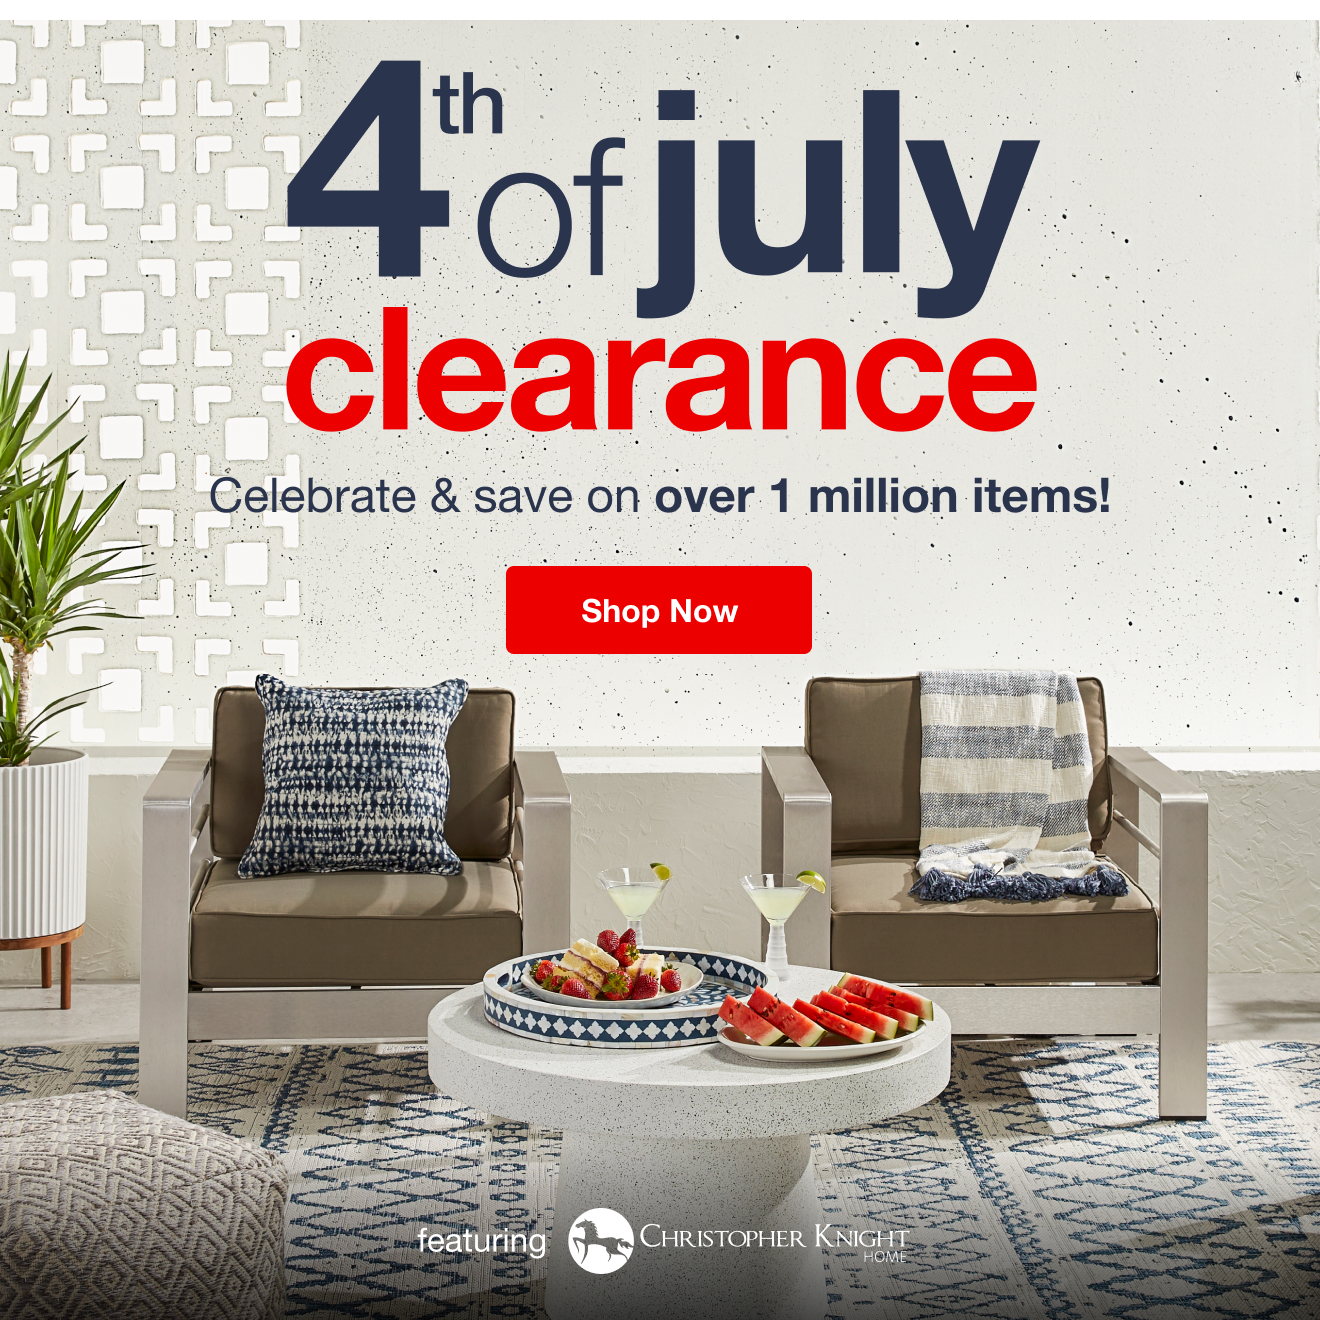 4th of July Clearance Event!